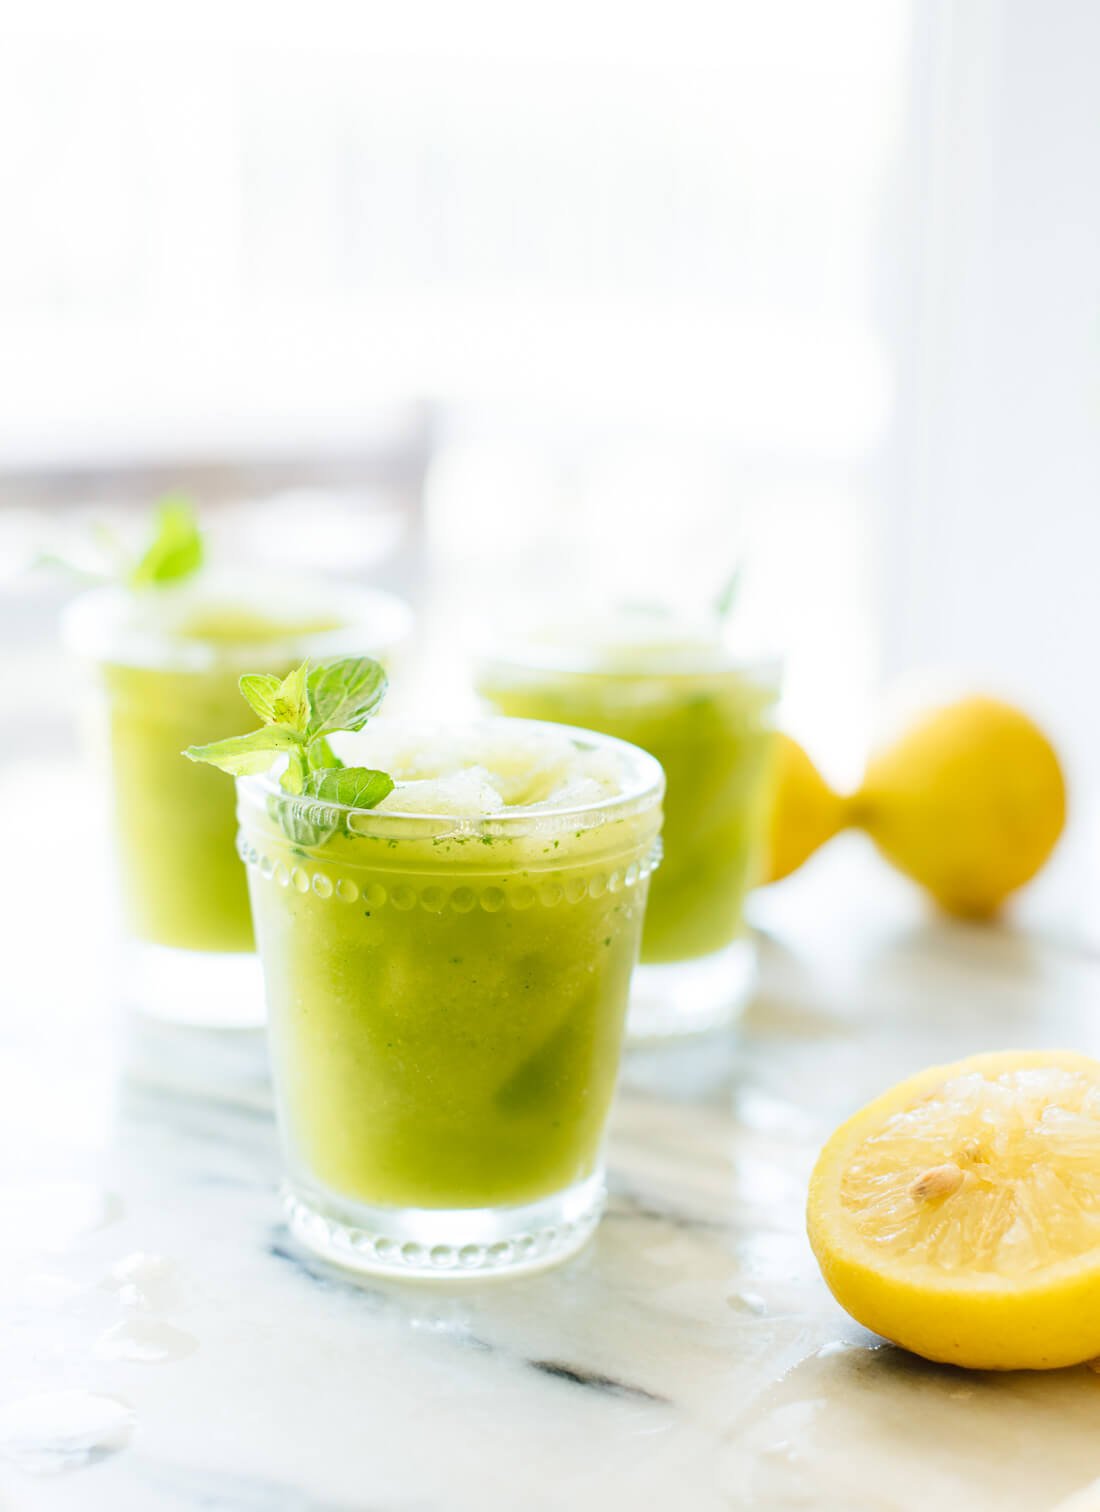 You'll love this frozen mint lemonade recipe (also called limonana!) cookieandkate.com